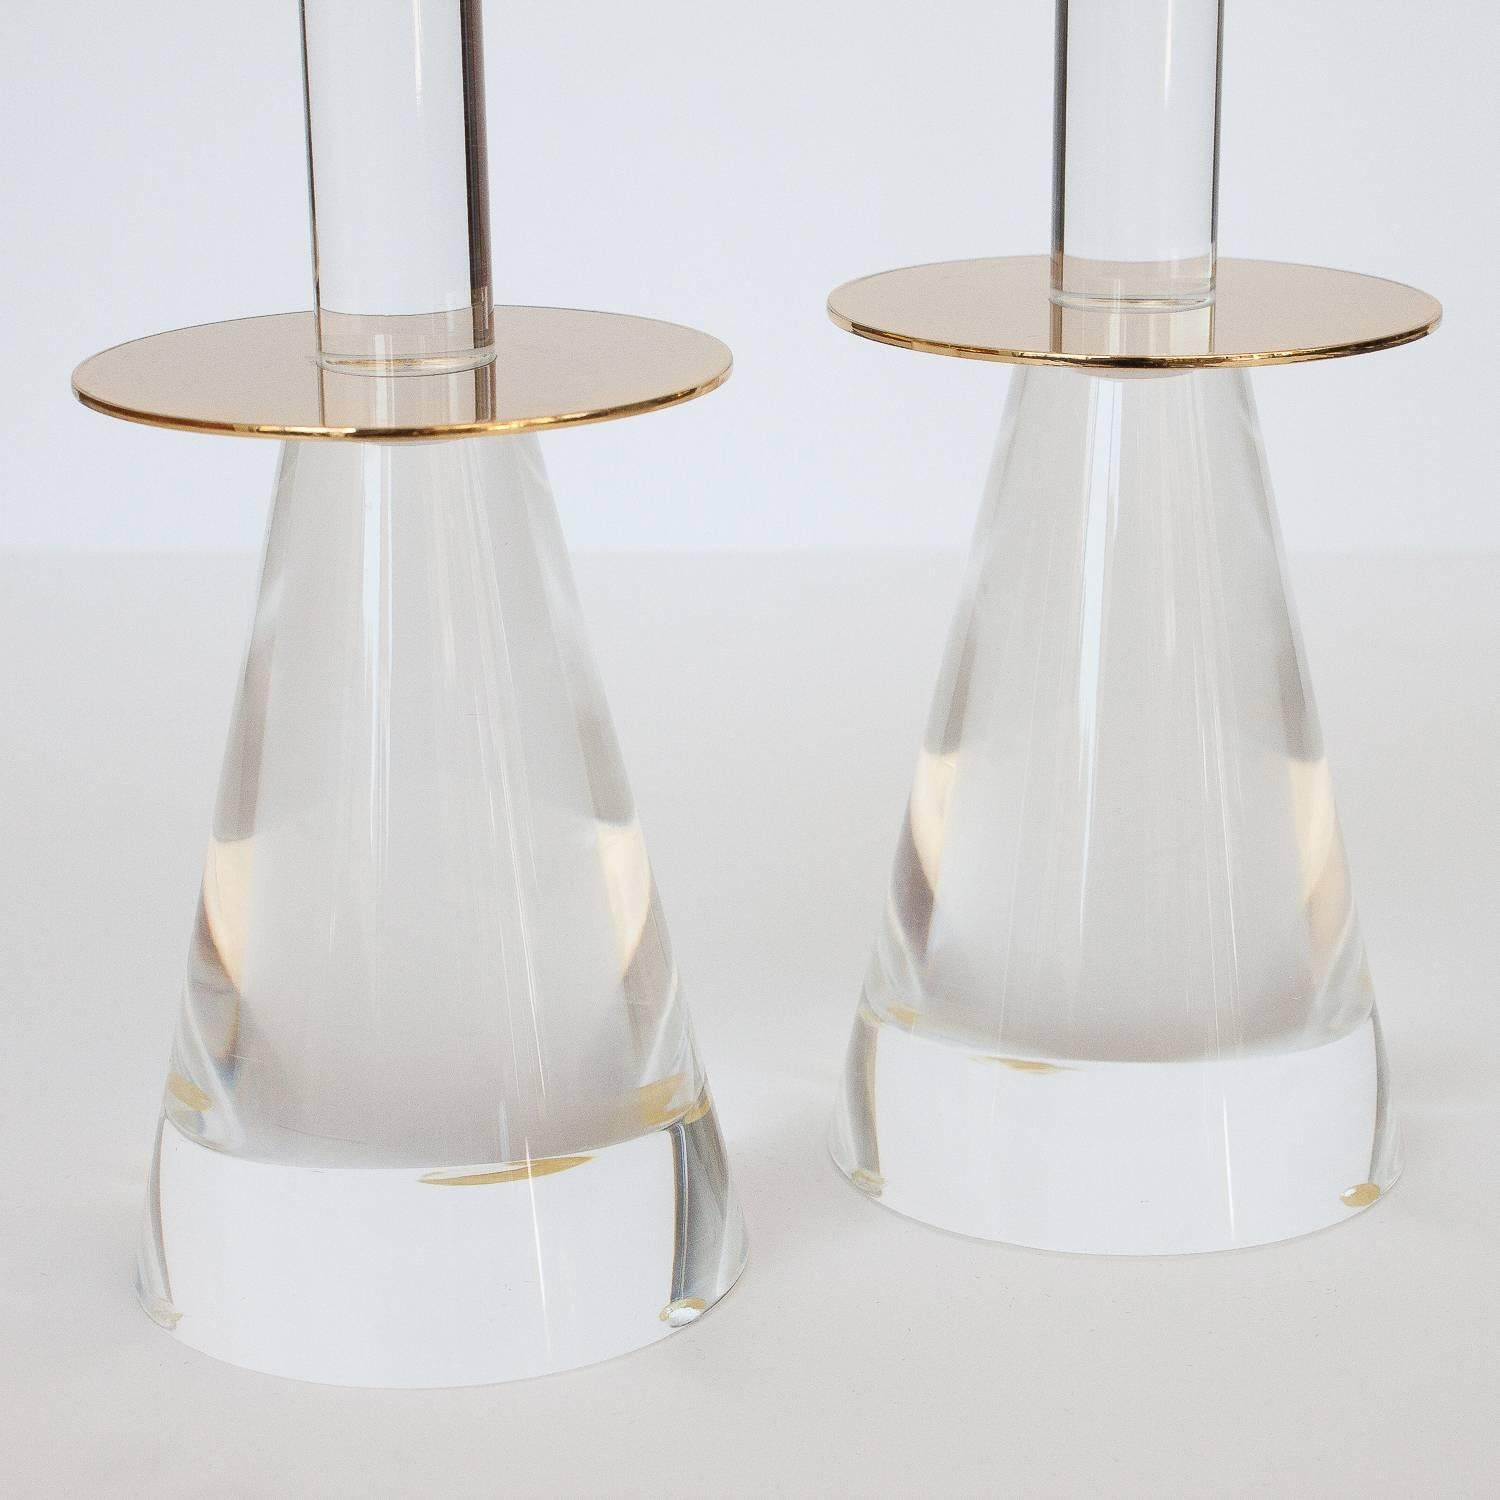 Polished Pair of Lucite and Brass Candlesticks